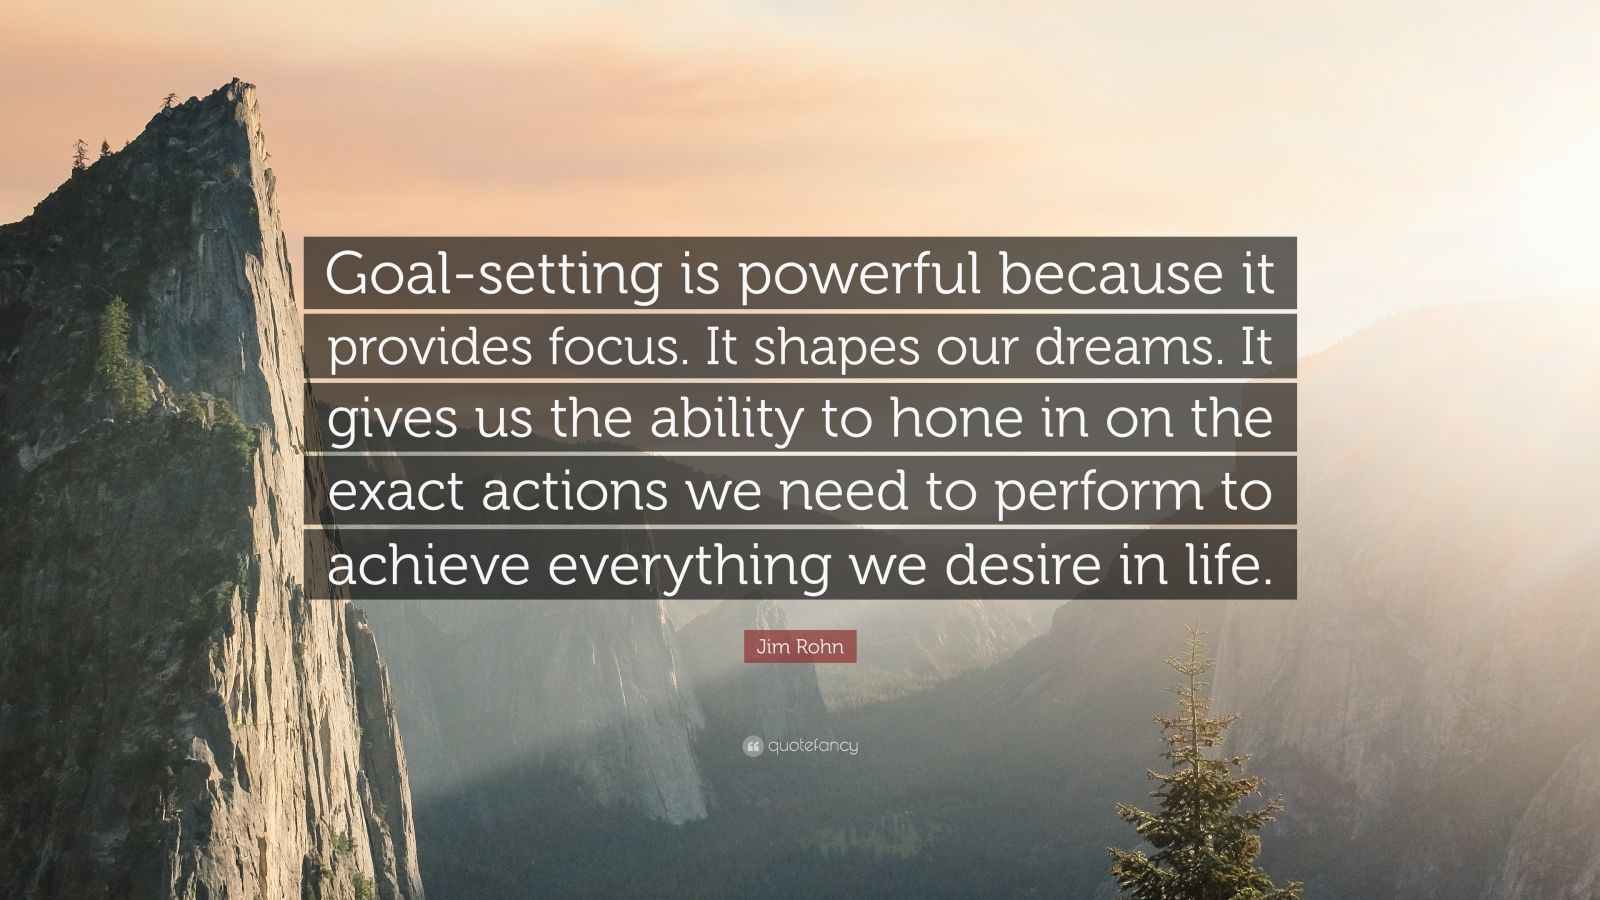 Jim Rohn Quote: “Goal-setting is powerful because it provides focus. It